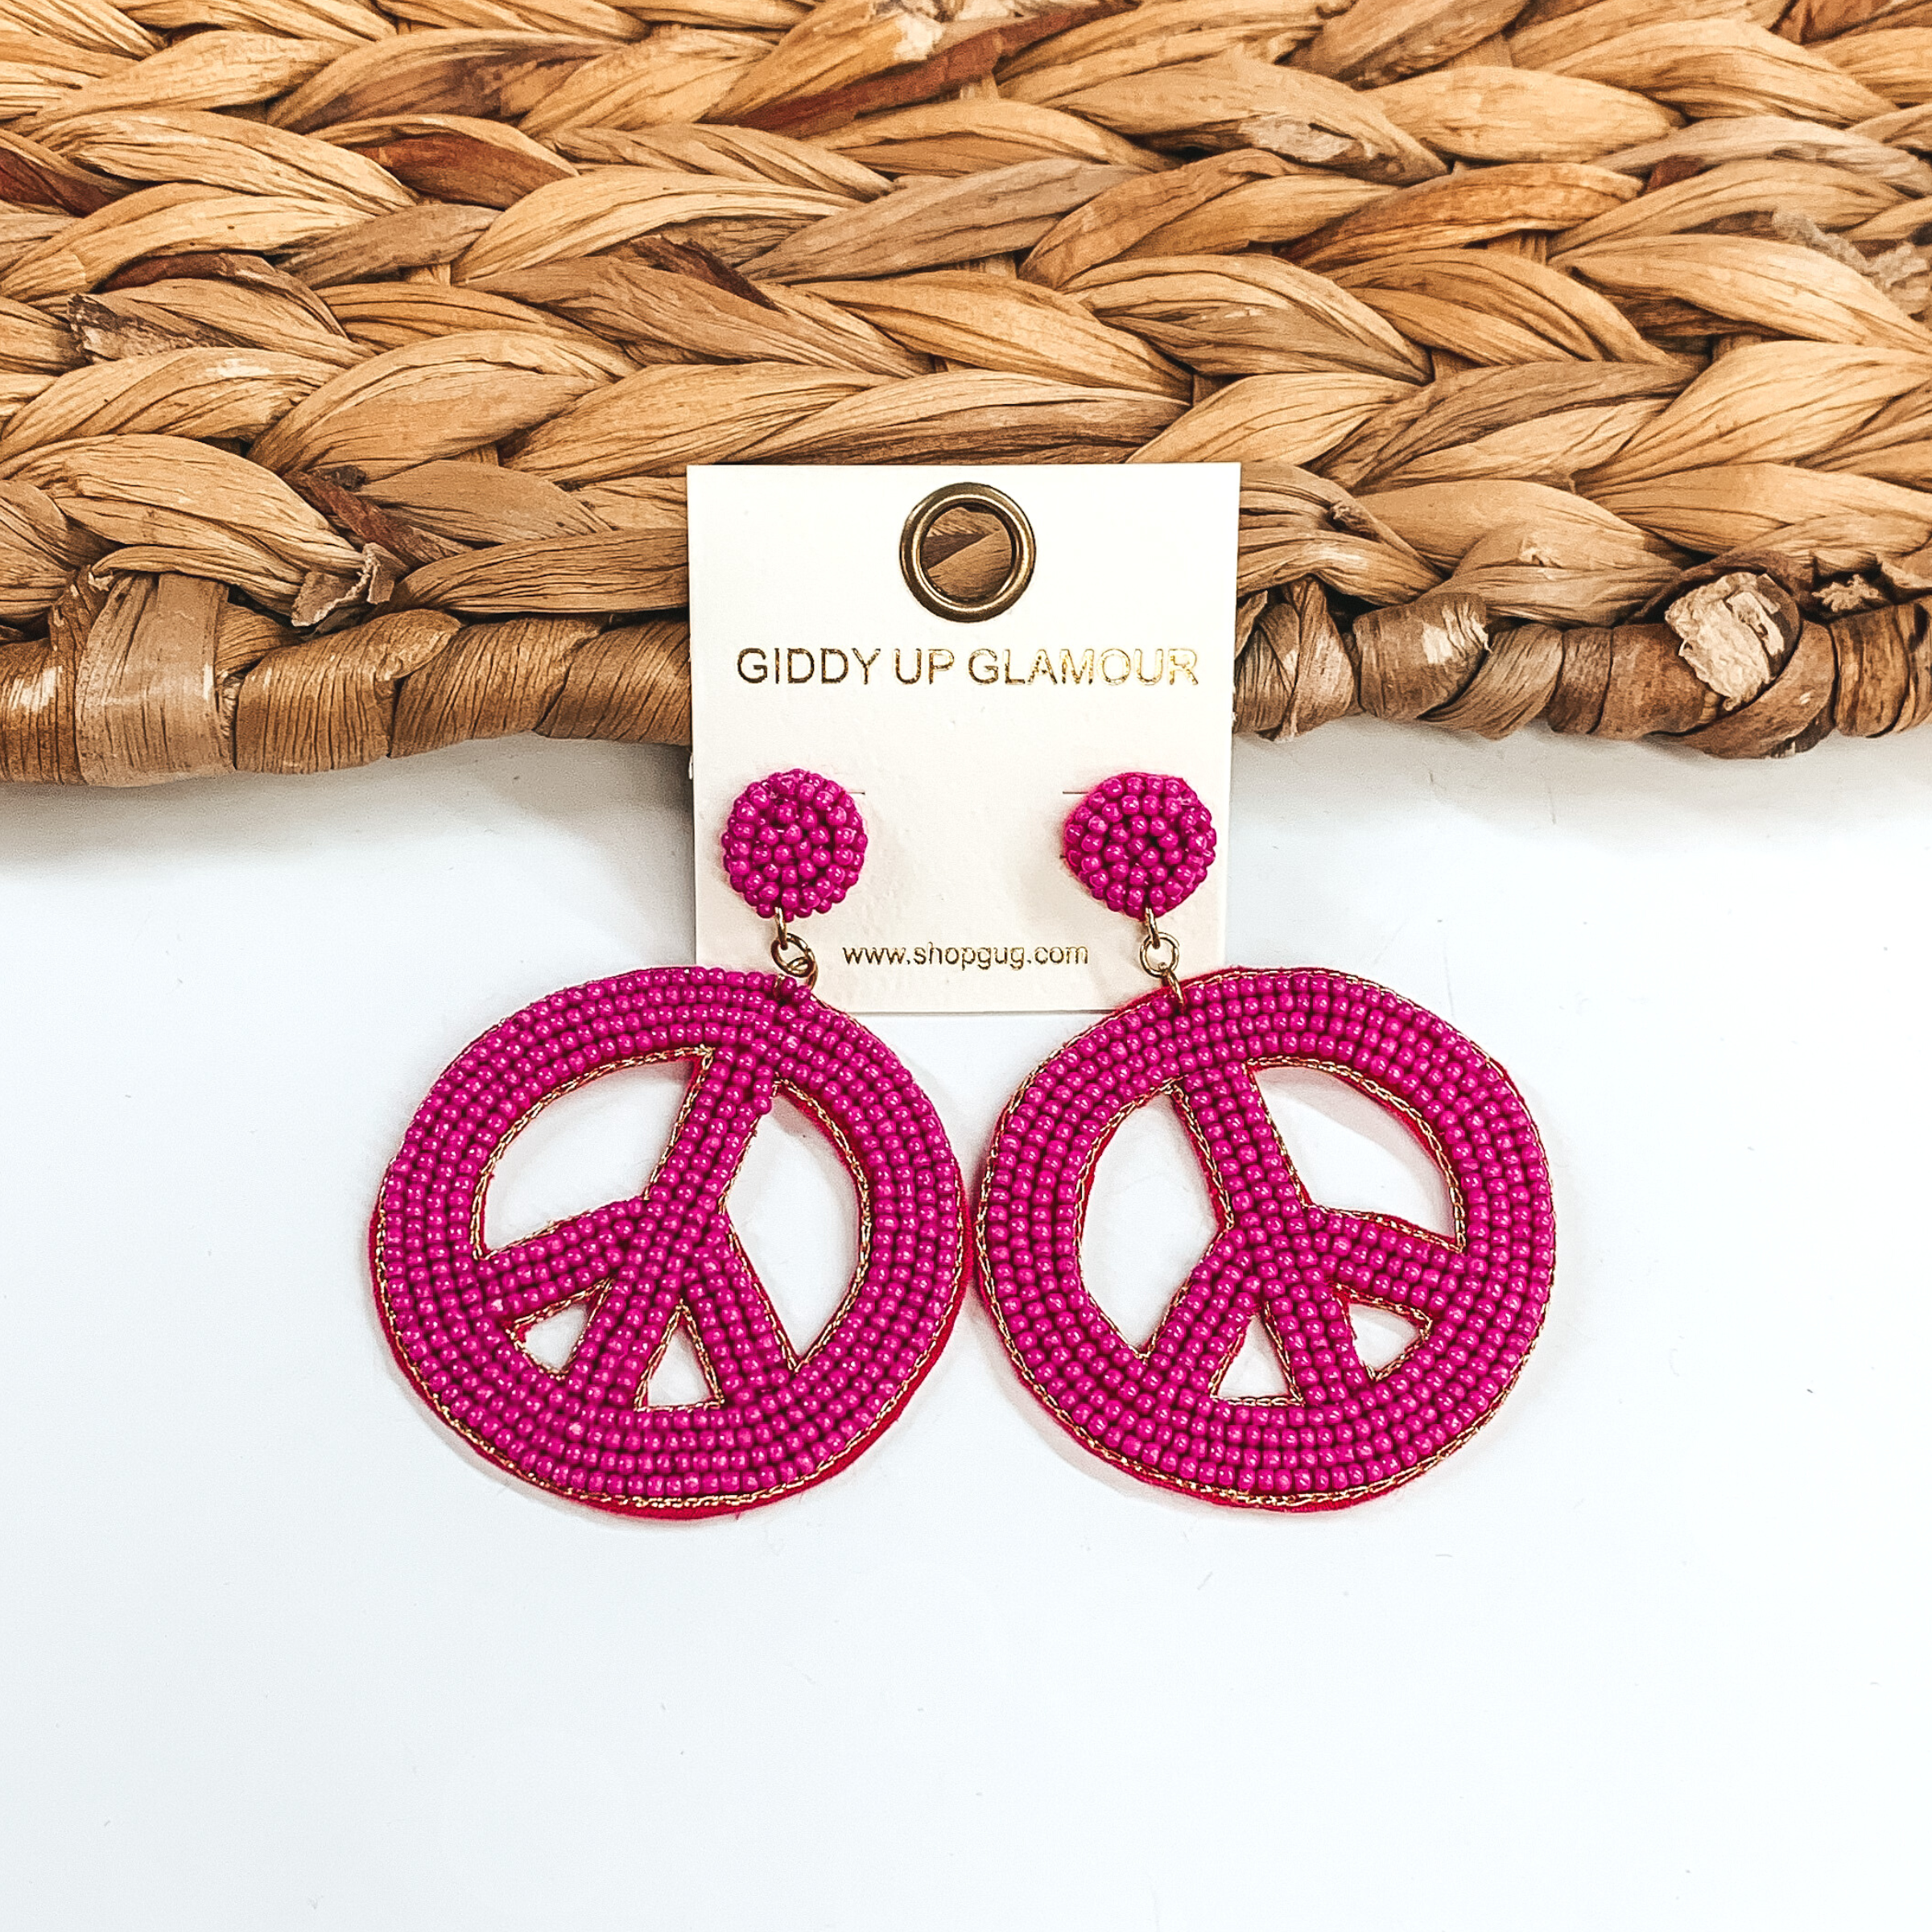 Circle beaded stud earrings with a beaded peace sign in fuchsia. These earrings are pictured on a half white and half basket weave background.